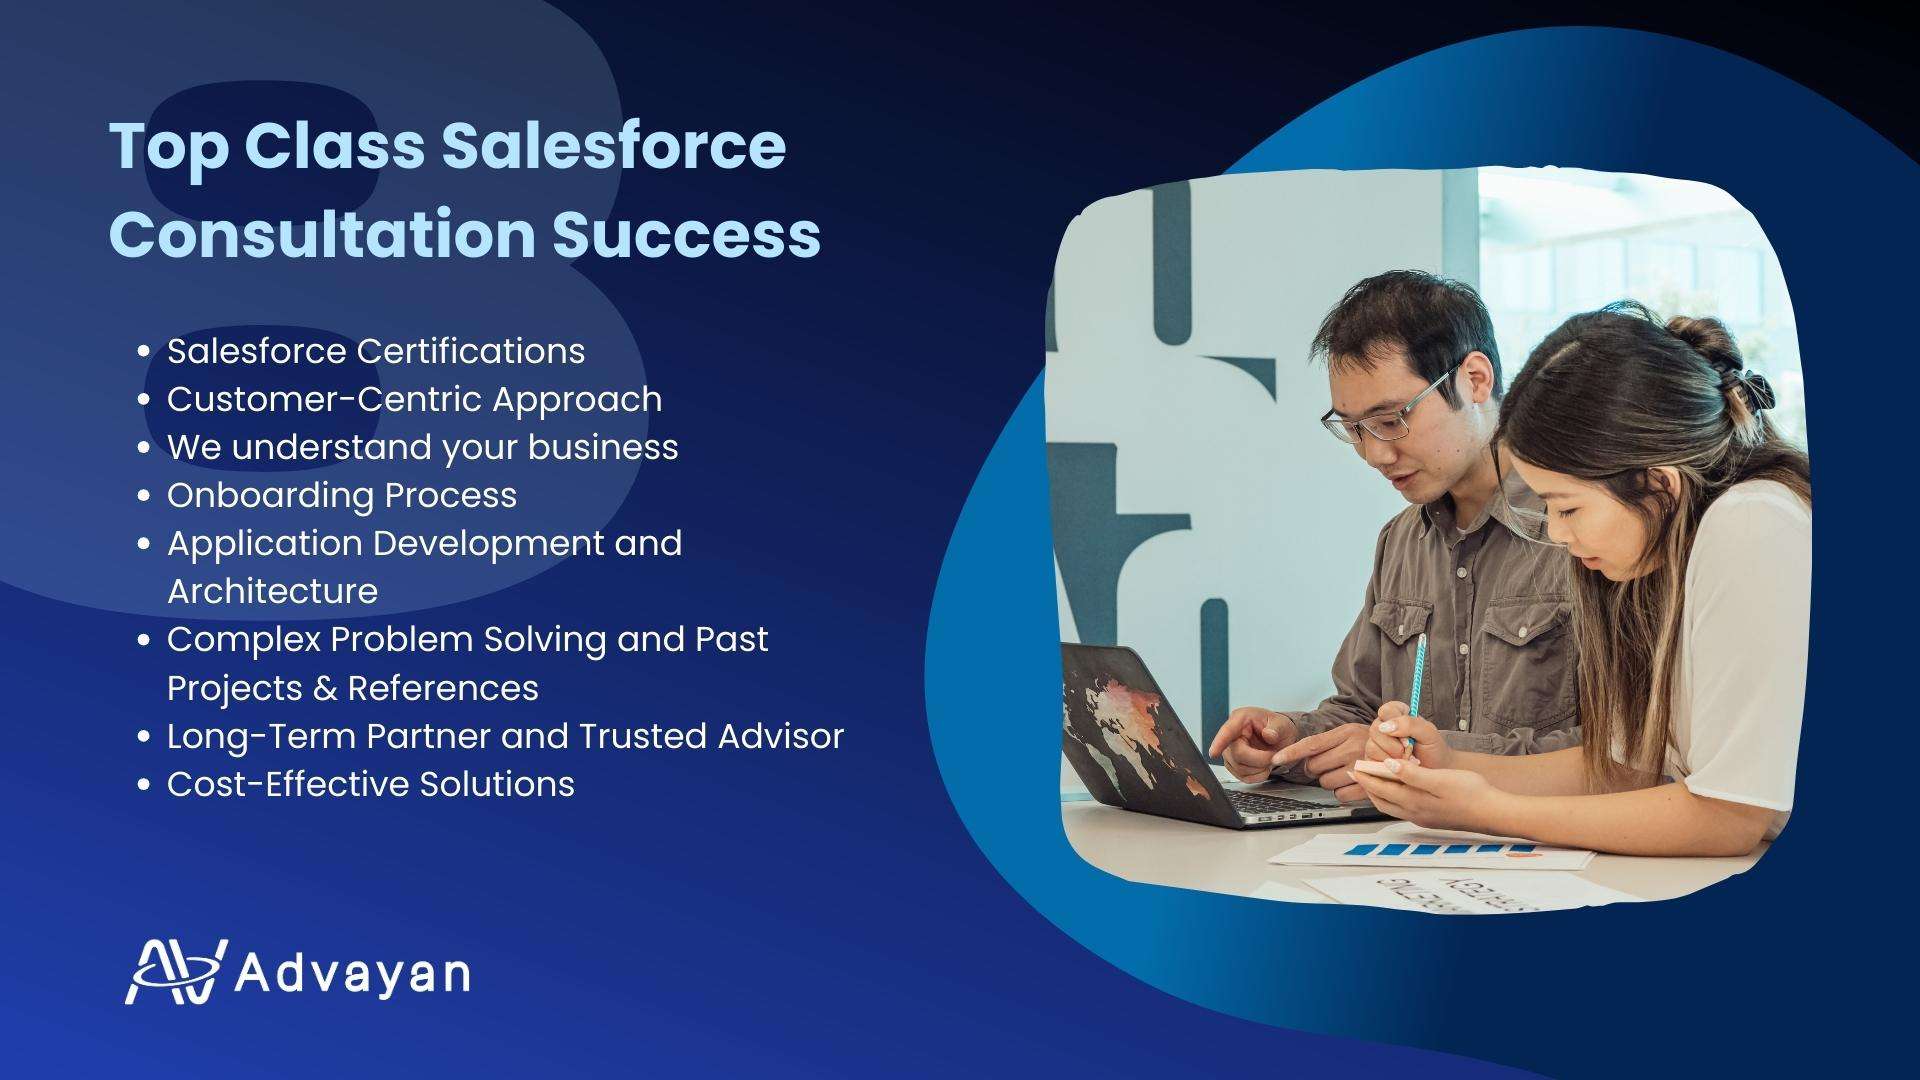 Here are 8 reasons why you can rely on Advayan for Top Class Salesforce Consultation Success